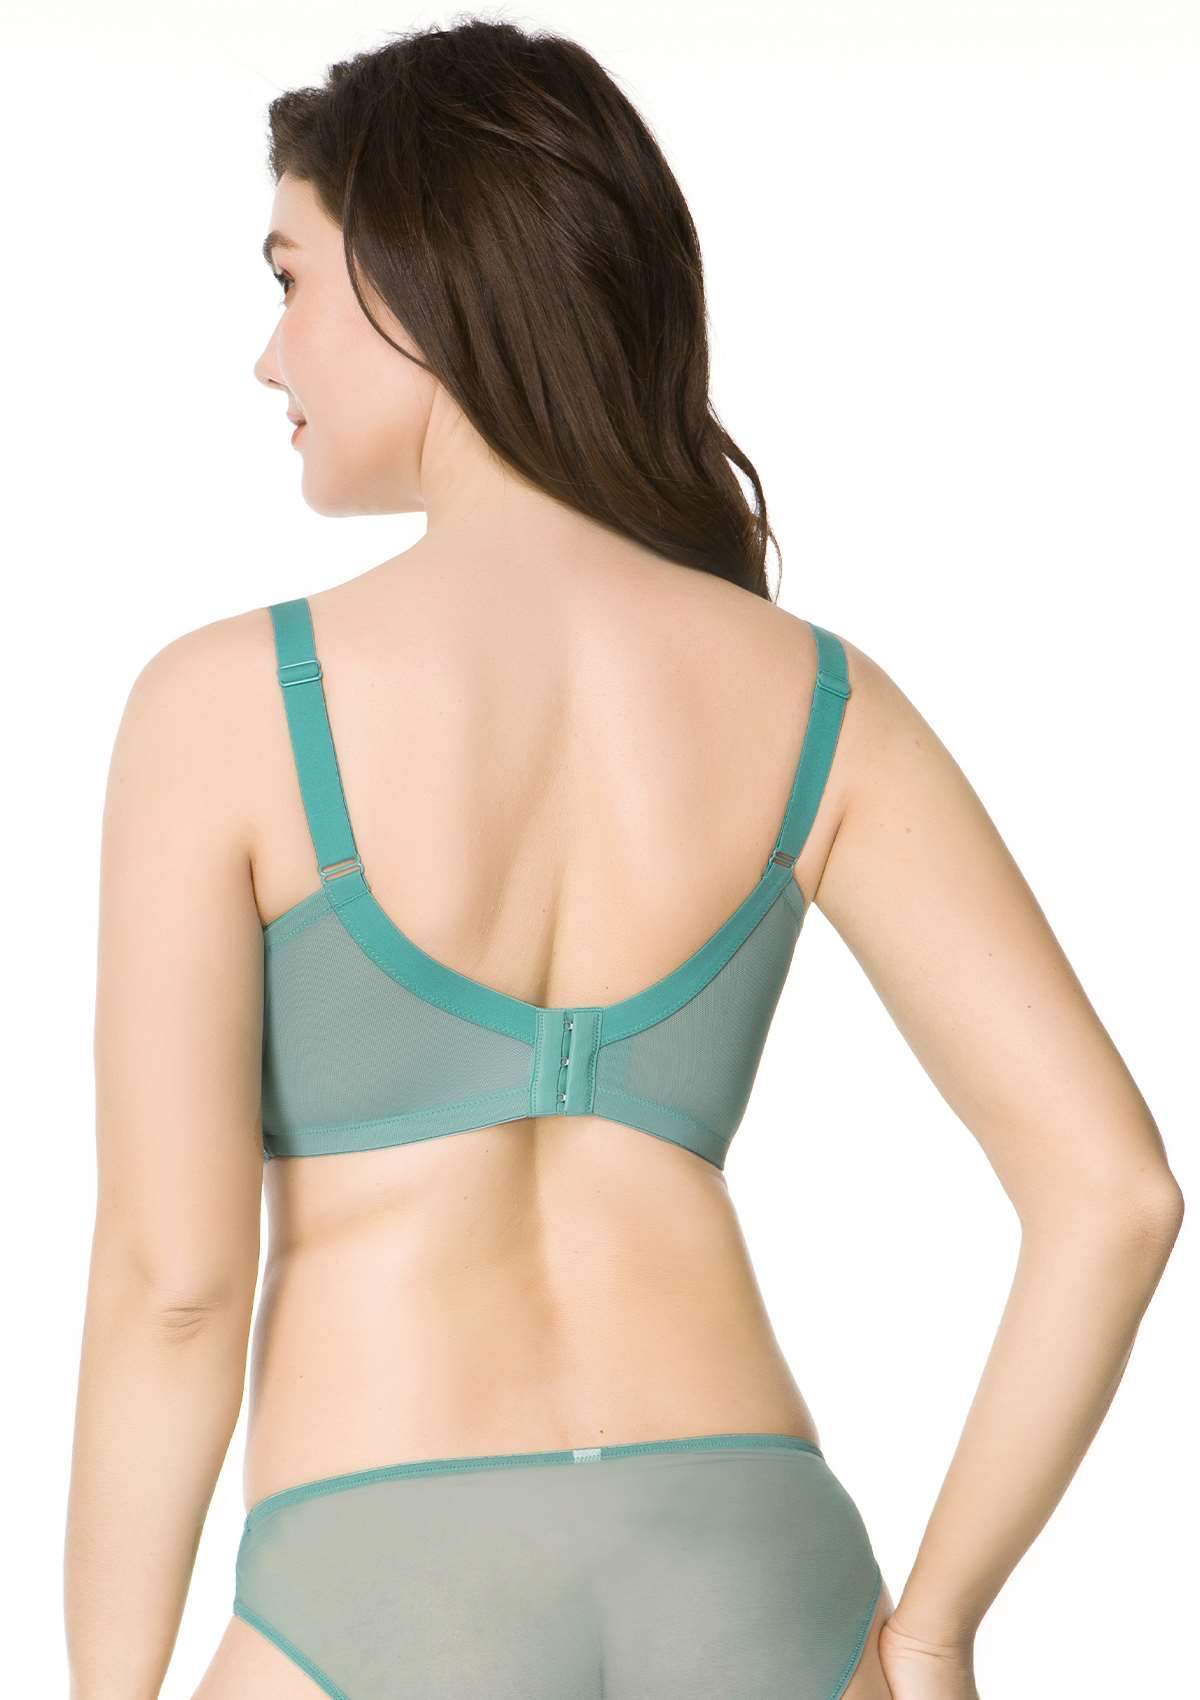 HSIA Paeonia Lace Full Coverage Underwire Non-Padded Uplifting Bra - Teal / 36 / DDD/F